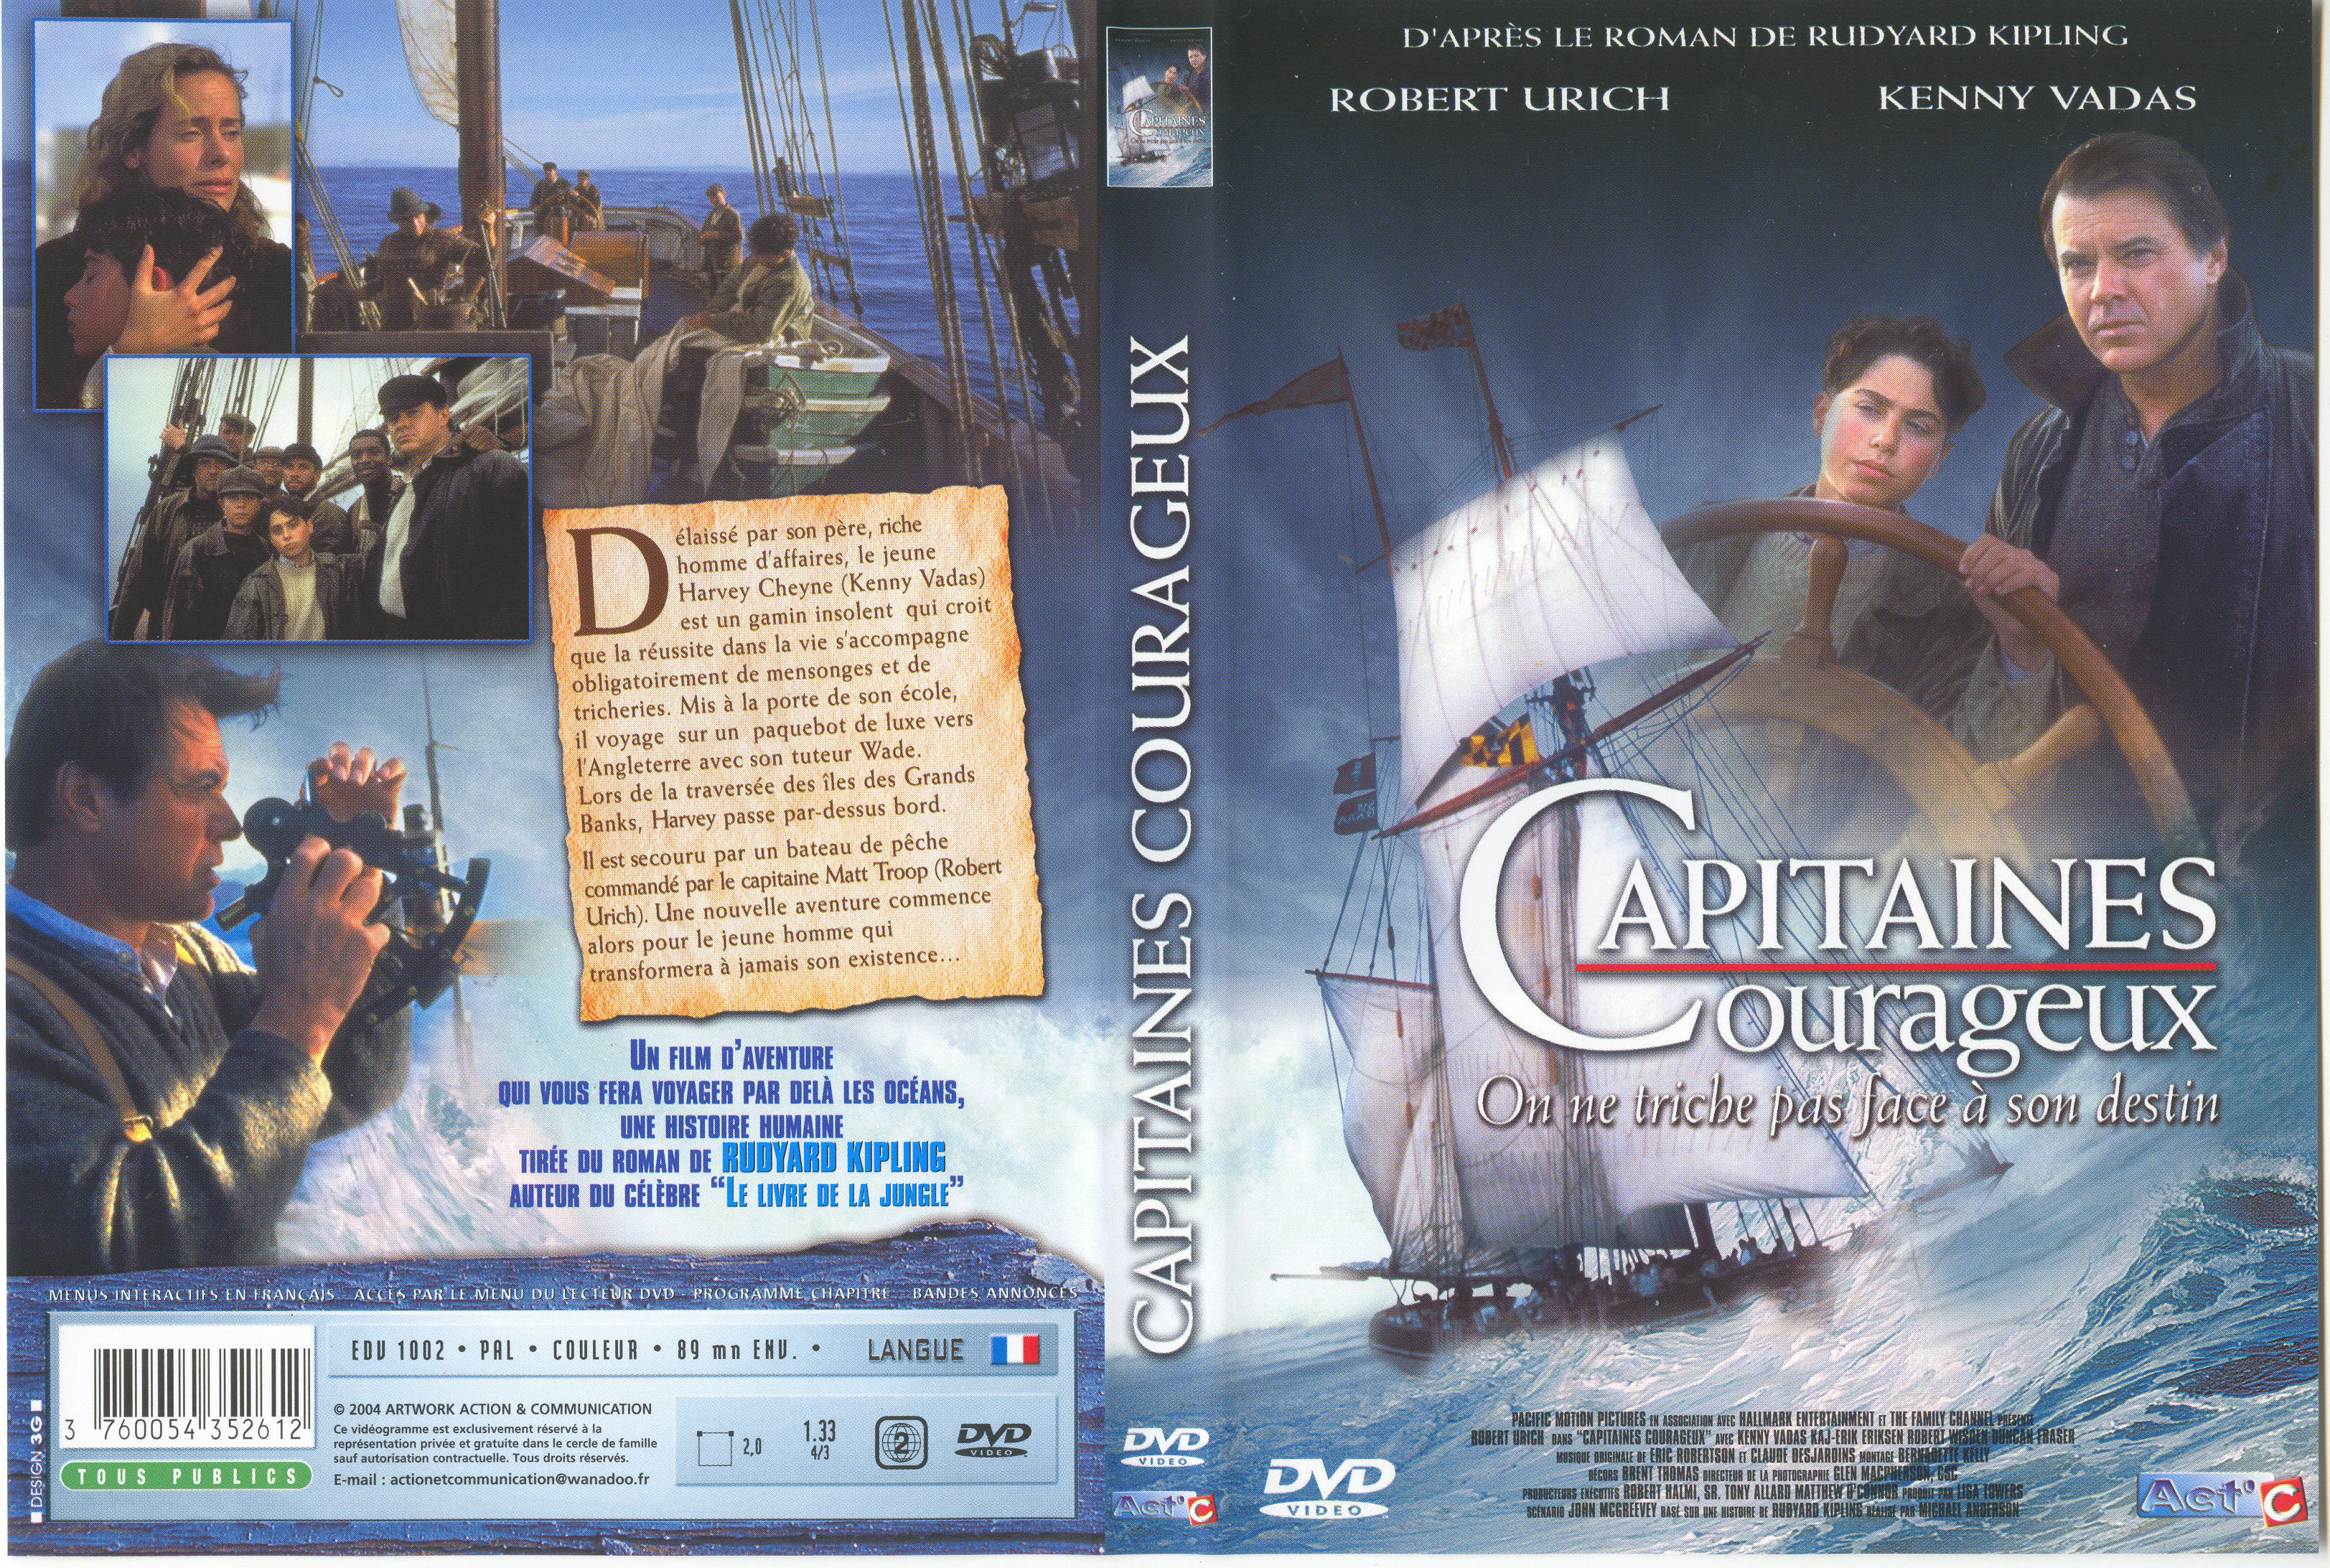 Jaquette DVD Capitaines courageux